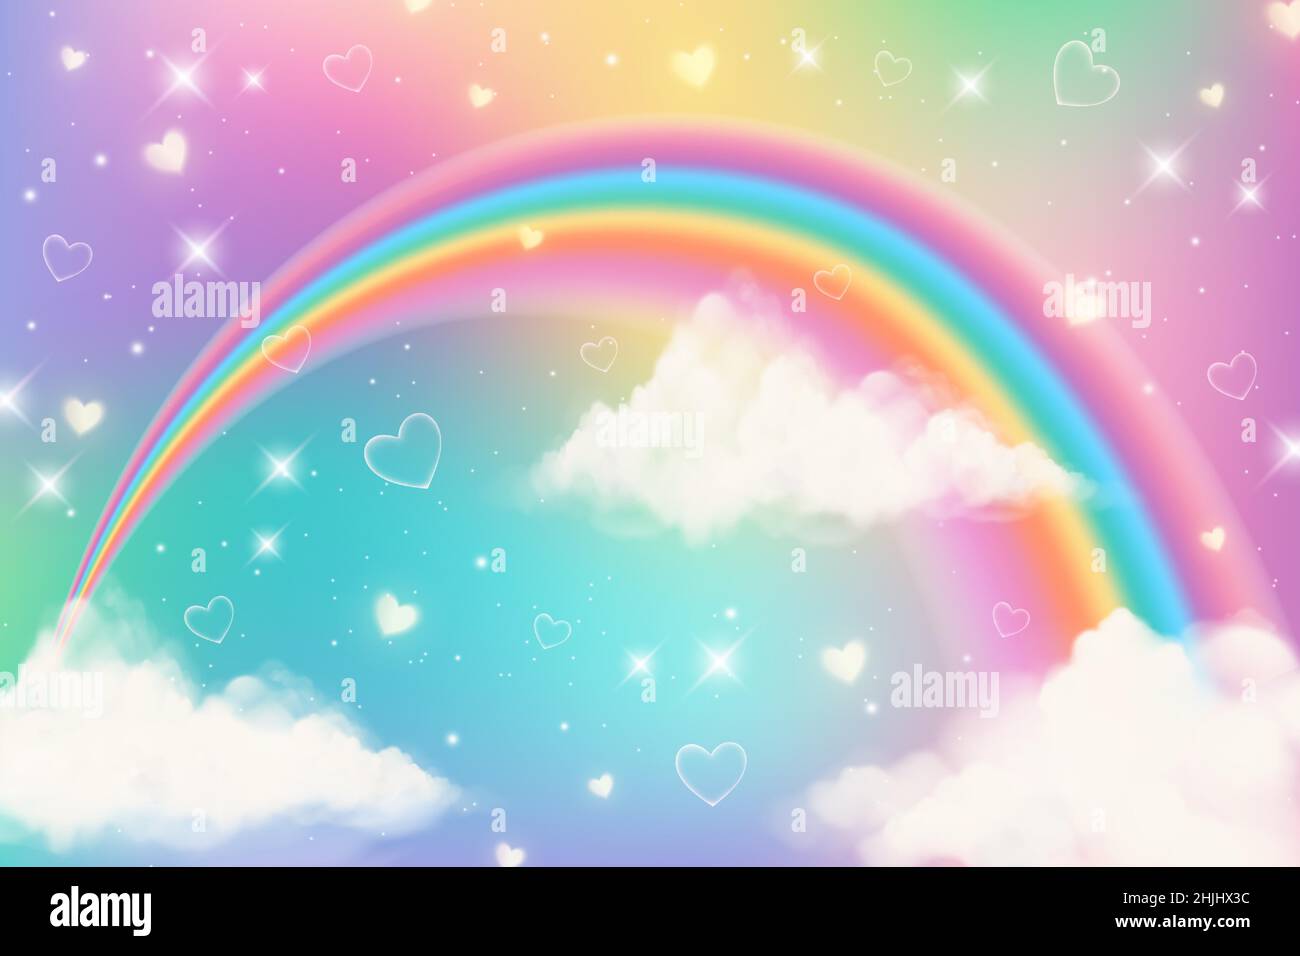 Illustration with Rainbow Pastel Colors Texture Multicolor Wallpaper  Texture Sky and Colors of Princess and Unicorns Stock Photo  Image of  unicorn copy 224112252